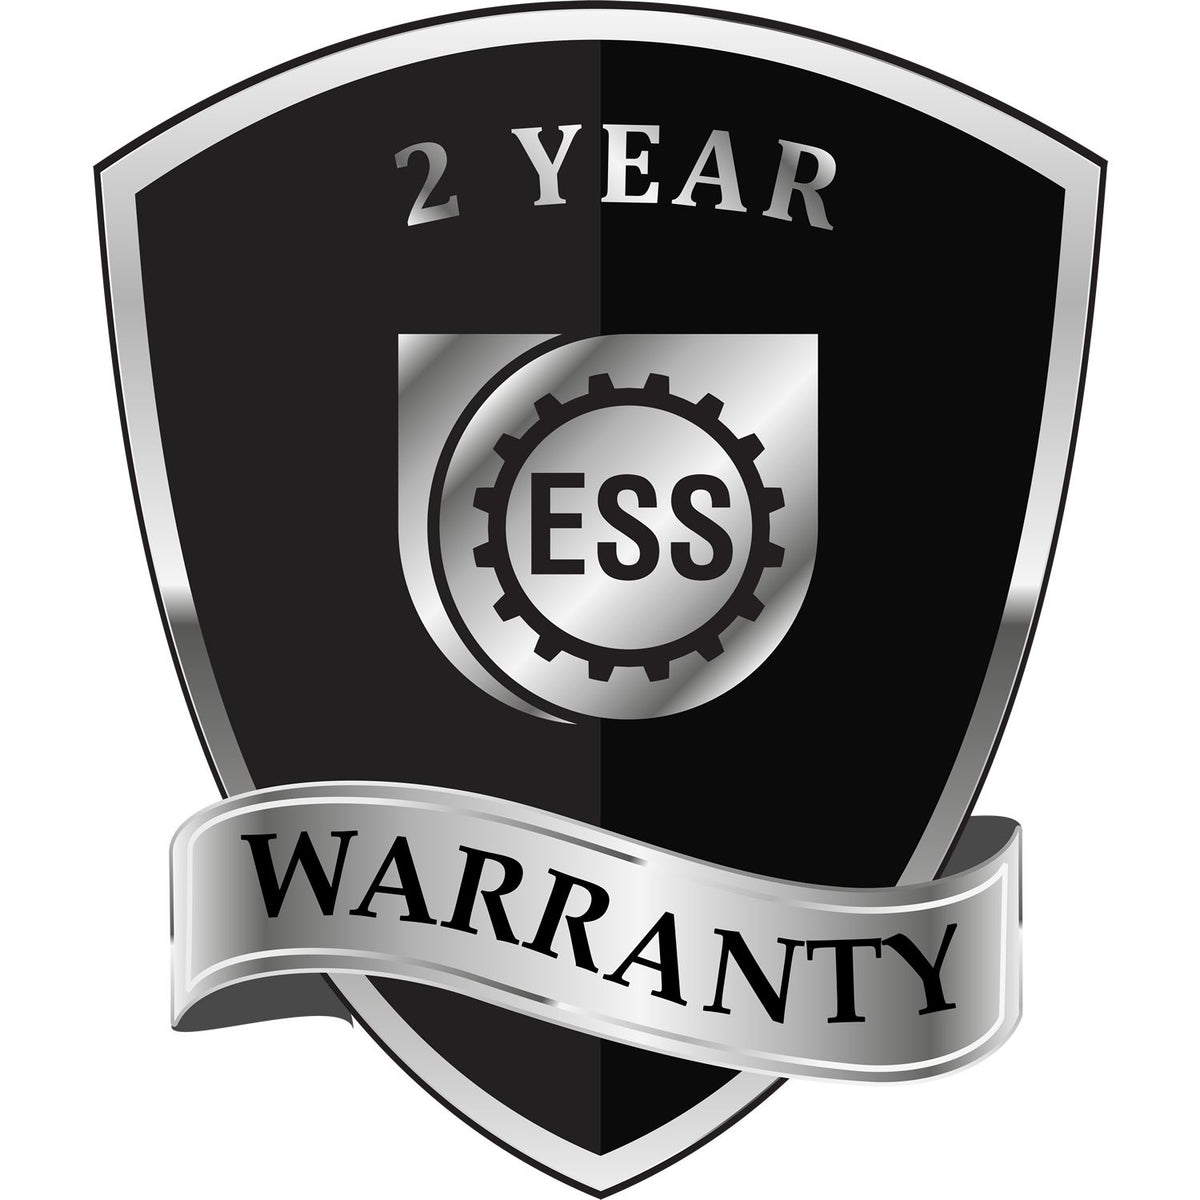 A black and silver badge or emblem showing warranty information for the Gift Idaho Geologist Seal